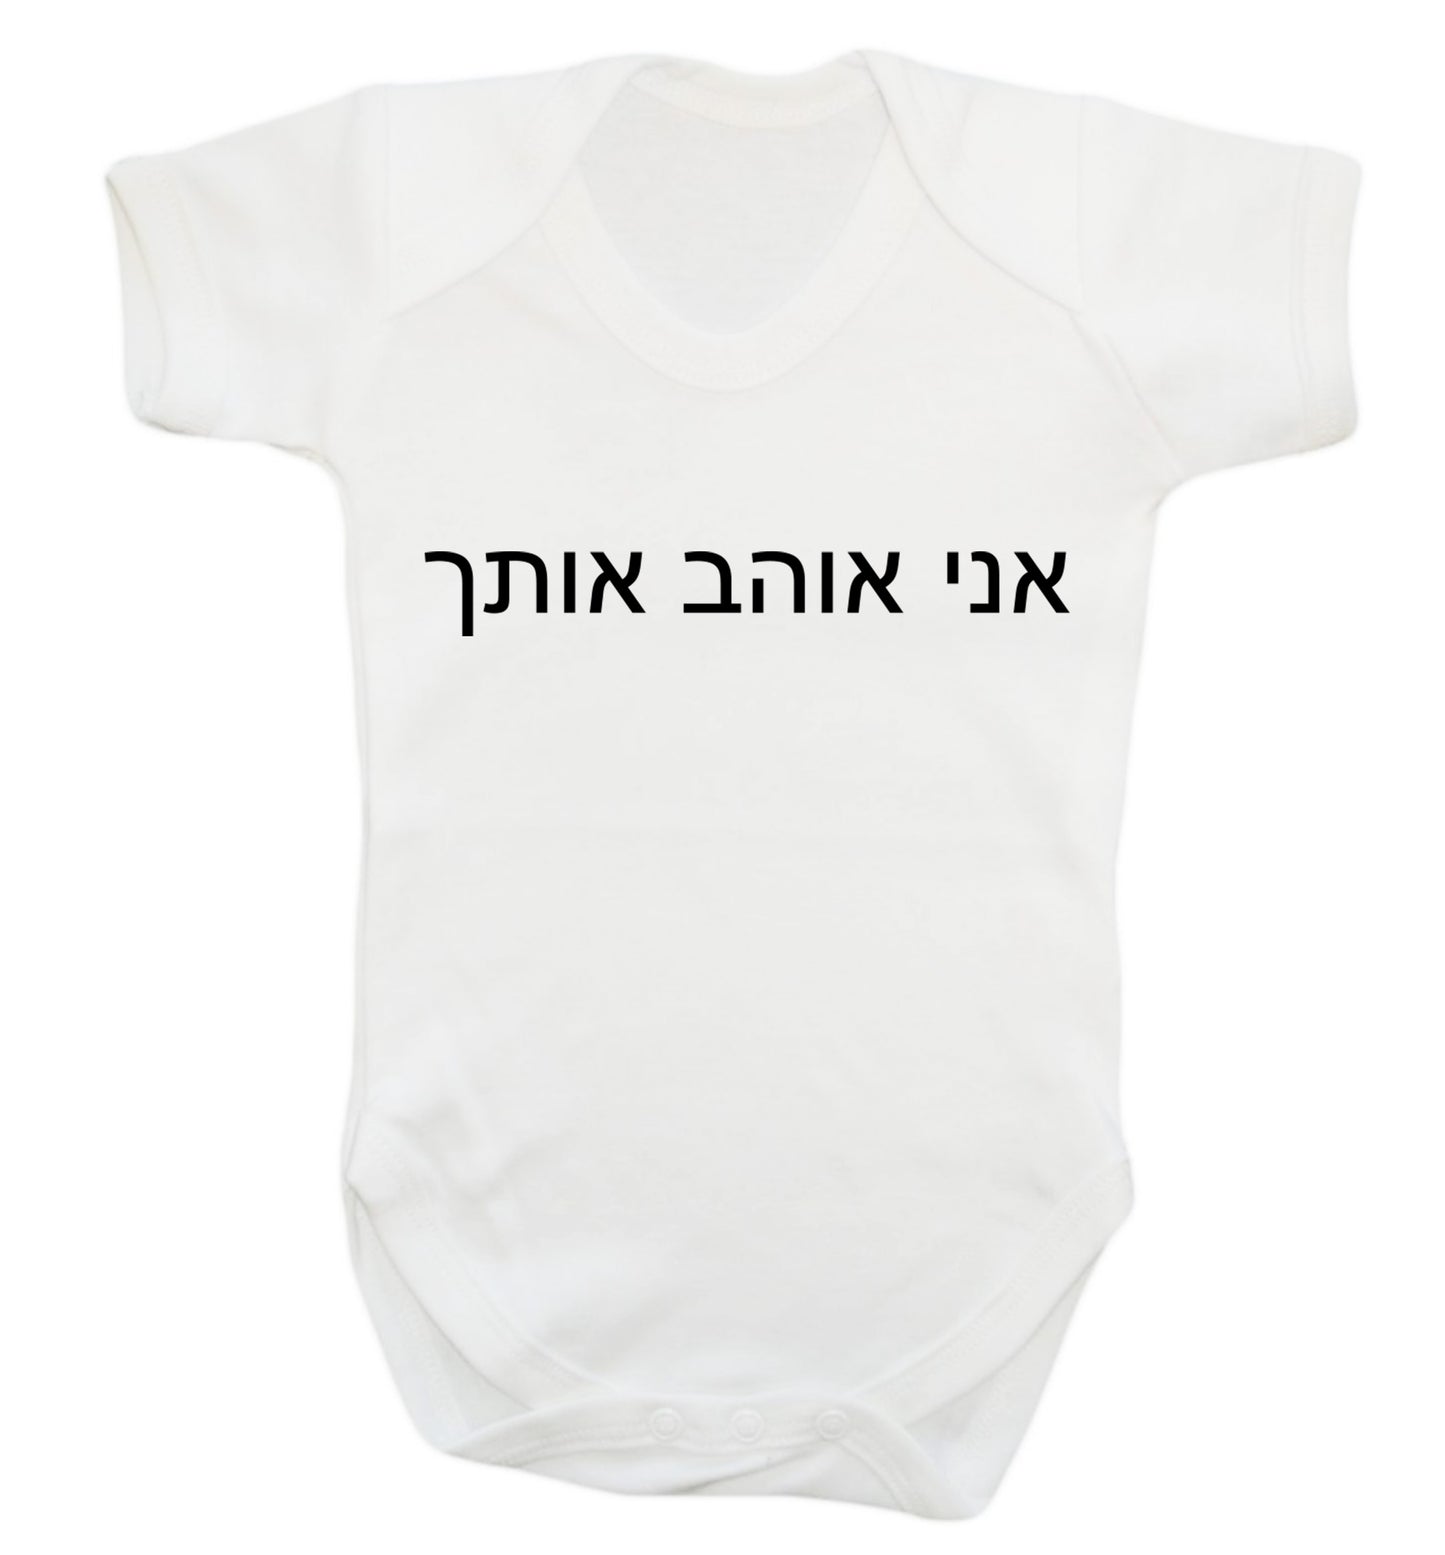 ___ ____ ____ - I love you Baby Vest white 18-24 months